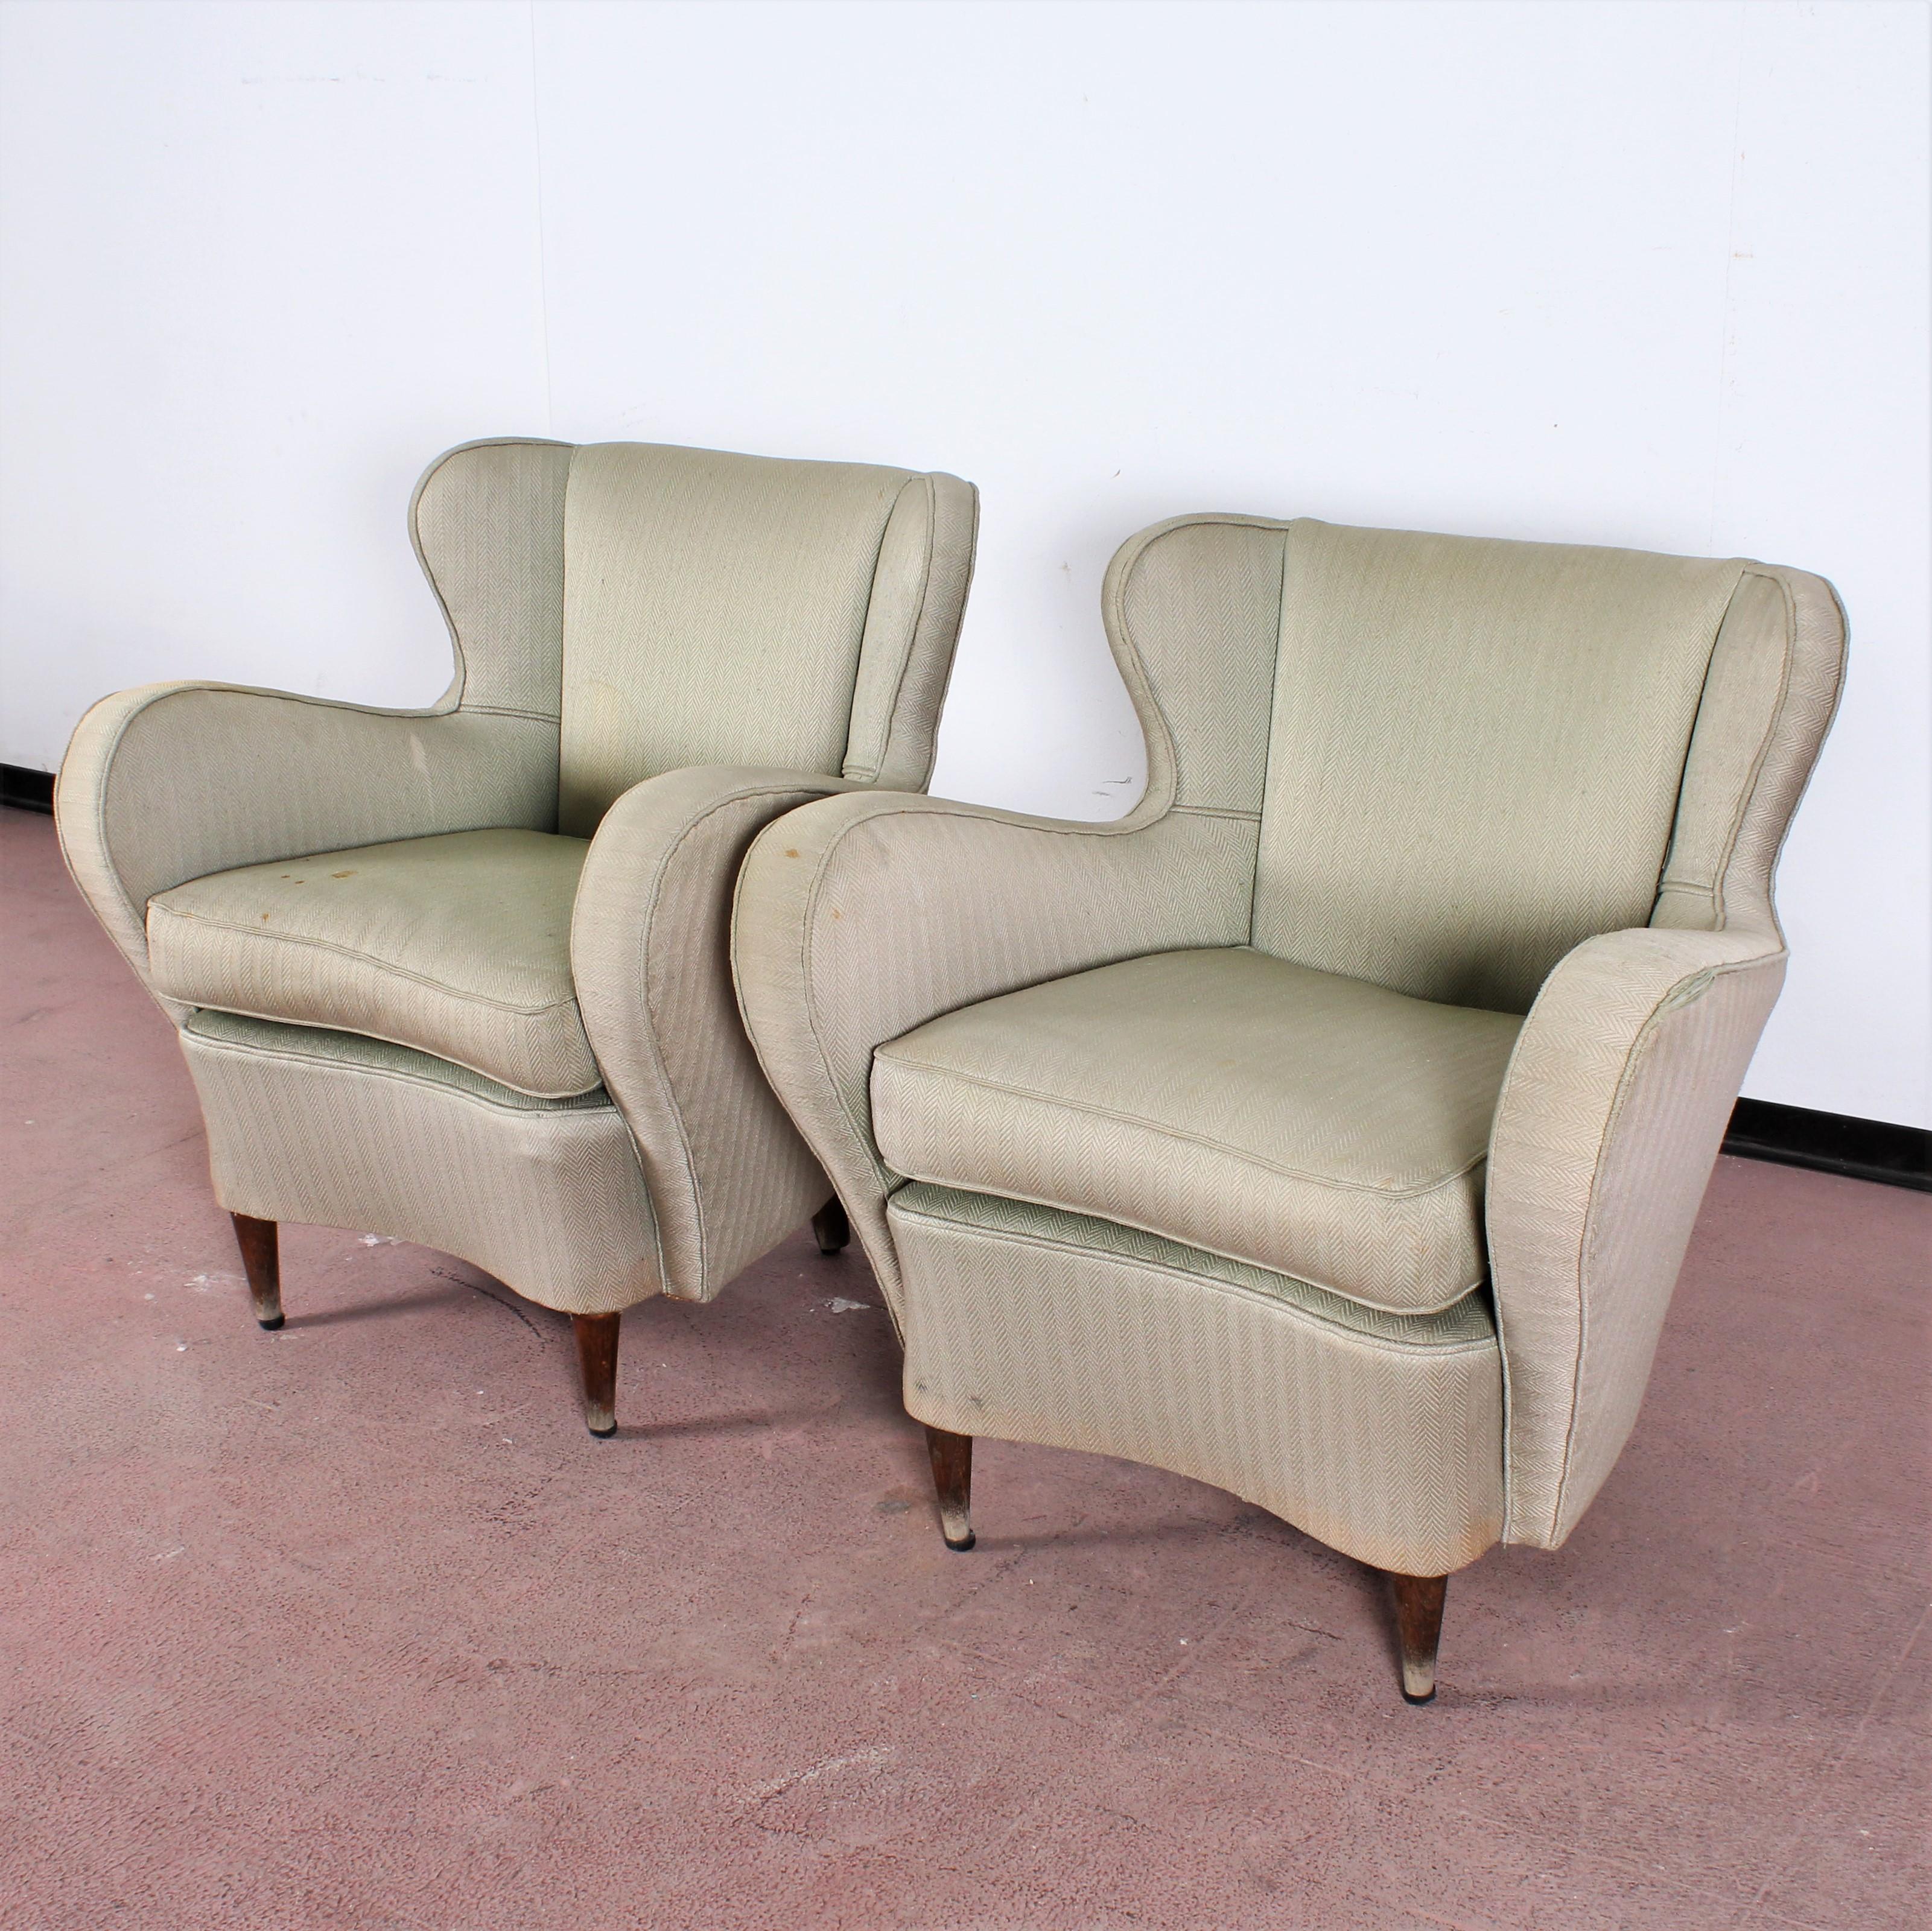 Beautiful pair of 1950s armchairs Osvaldo Borsani style. Legs and structure in wood, light green fabric covering.
Wear consistent with age and use but visible signs of humidity and spots of use have significantly altered the upholstery.
The two